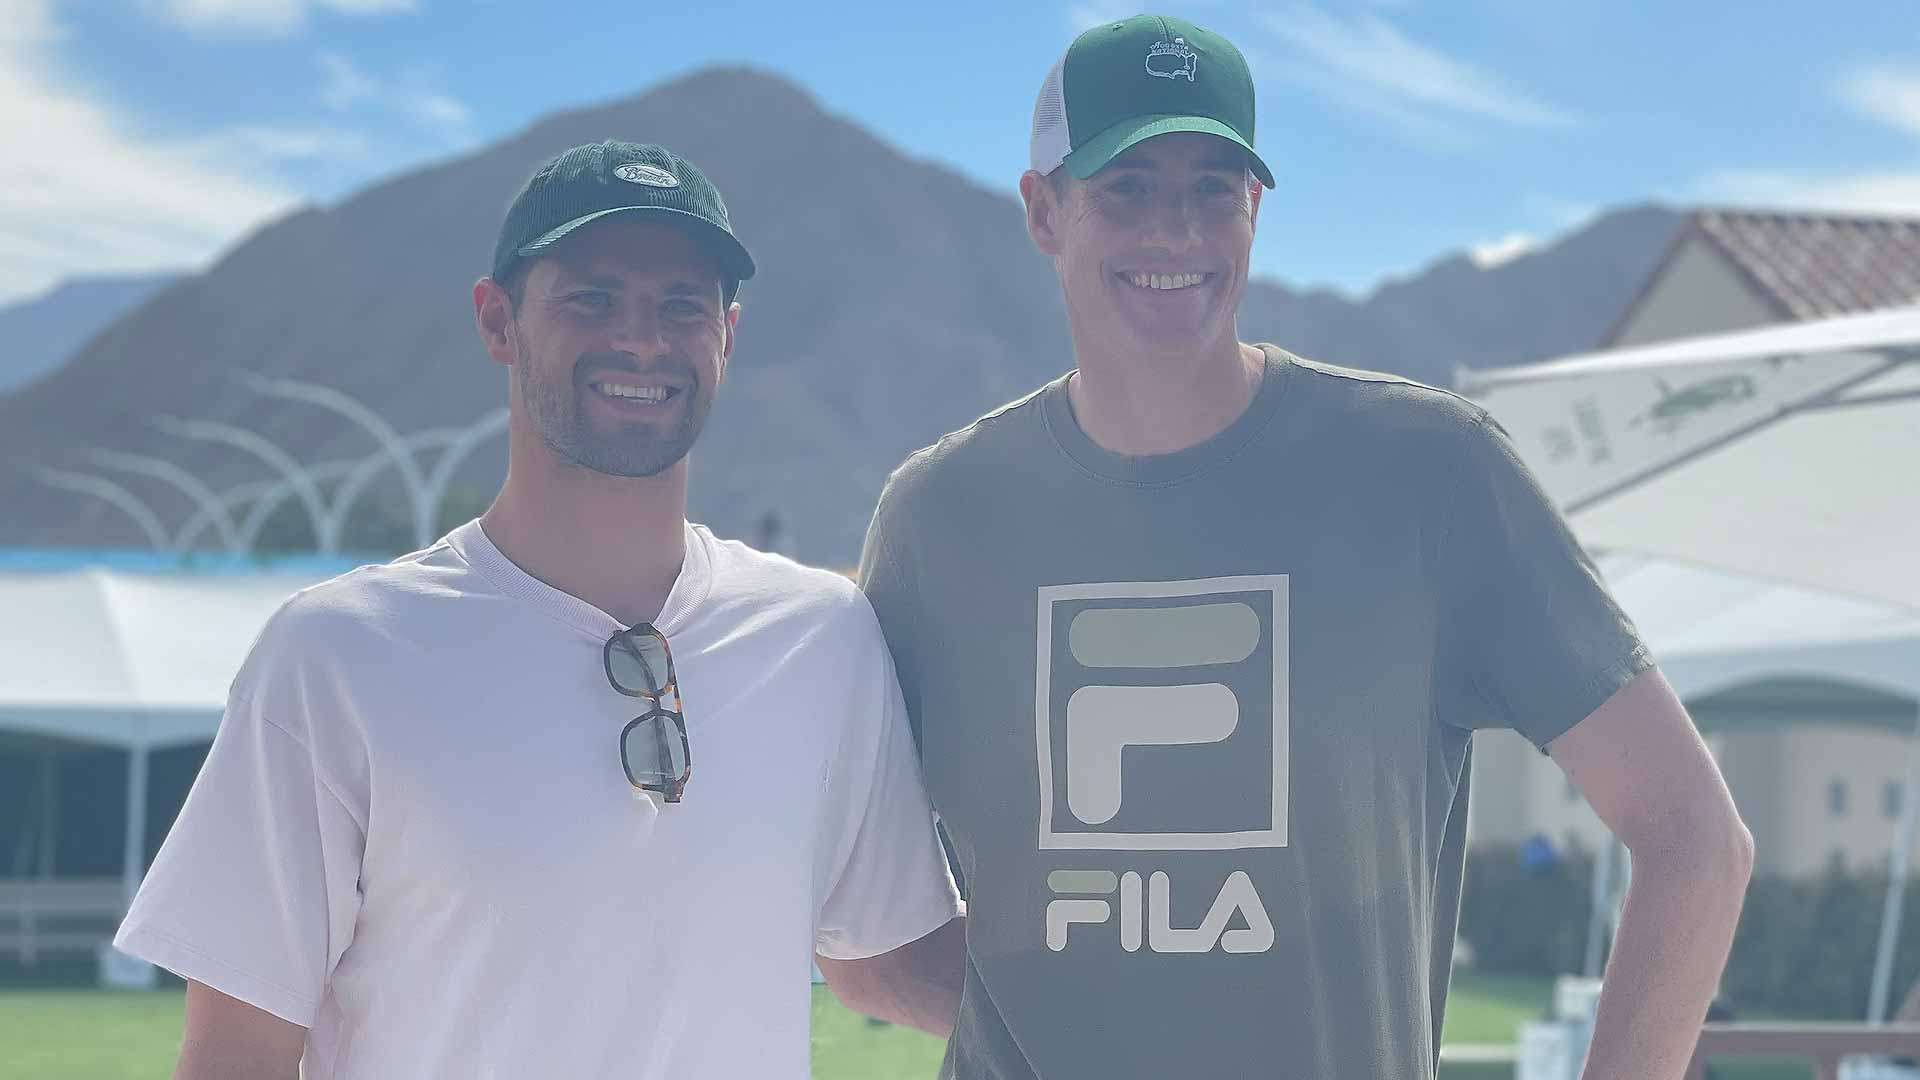 Olympic gold medalist Michael Andrew and John Isner pose for a photo at the Indian Wells Tennis Garden.